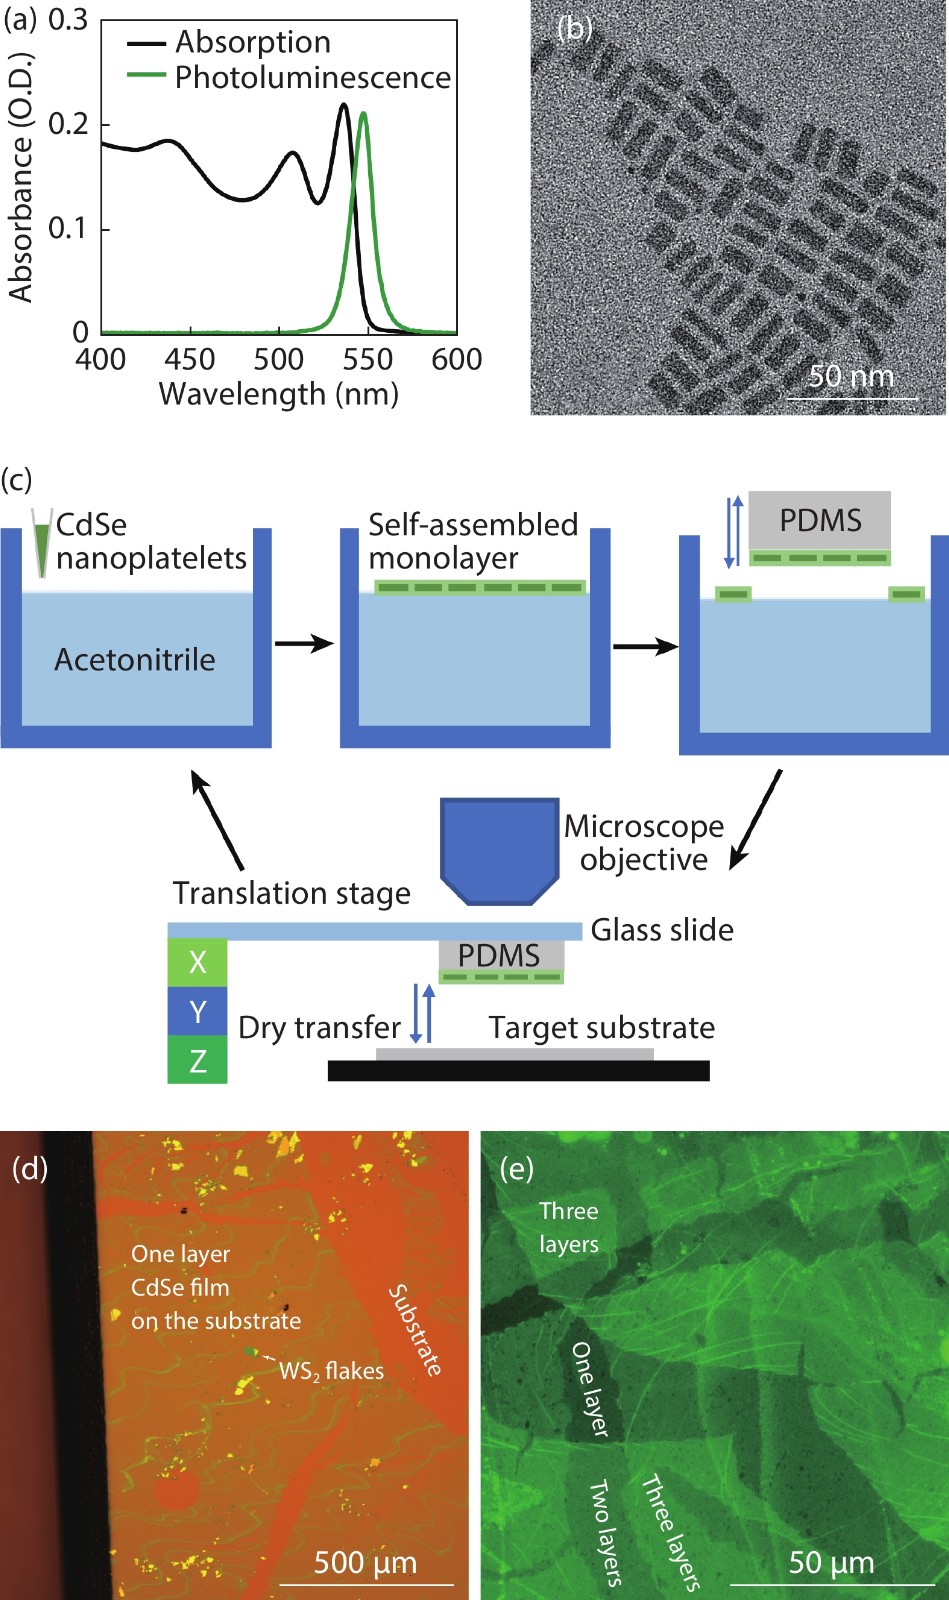 (Color online) (a) Absorption and photoluminescence spectra of the CdSe nanoplatelets. (b) Transmission electron microscopy (TEM) image of the nanoplatelets. (c) Schematic of PDMS assisted transferring method. (d) A bright-field microscopy image of a single layer of the CdSe nanoplatelet film on a SiO2/Si substrate with WS2 flakes. (e) Photoluminescence microscopy image of CdSe films with one, two and three layers of nanoplatelets.